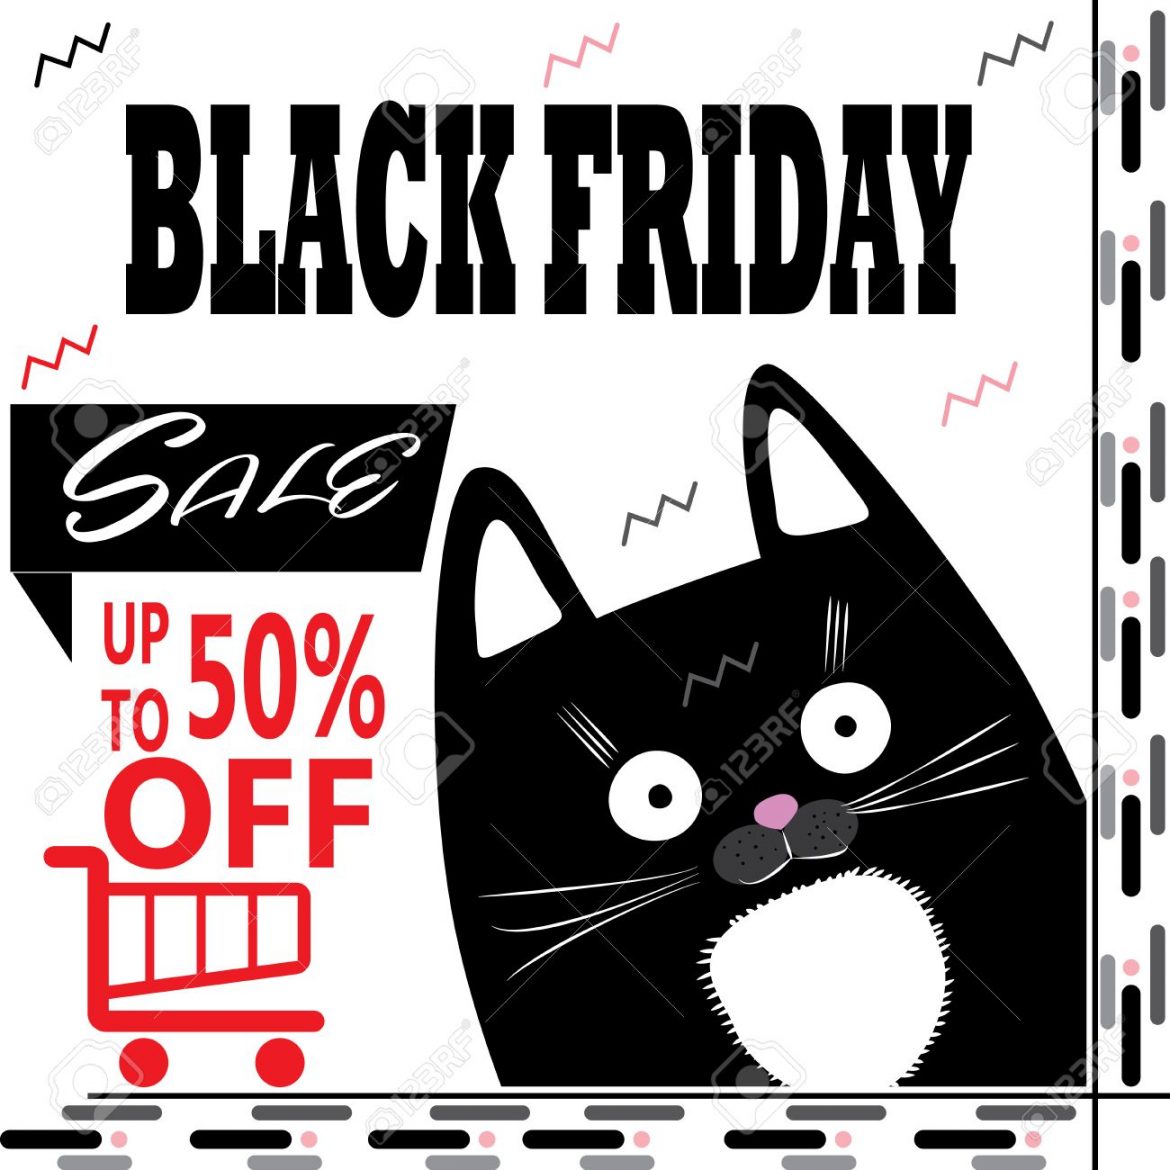 68604517-Black-Friday-Sale-discount-banner-with-cute-black-cat-Marketing-Shopping-card-design-Advertising-wal-Stock-Vector